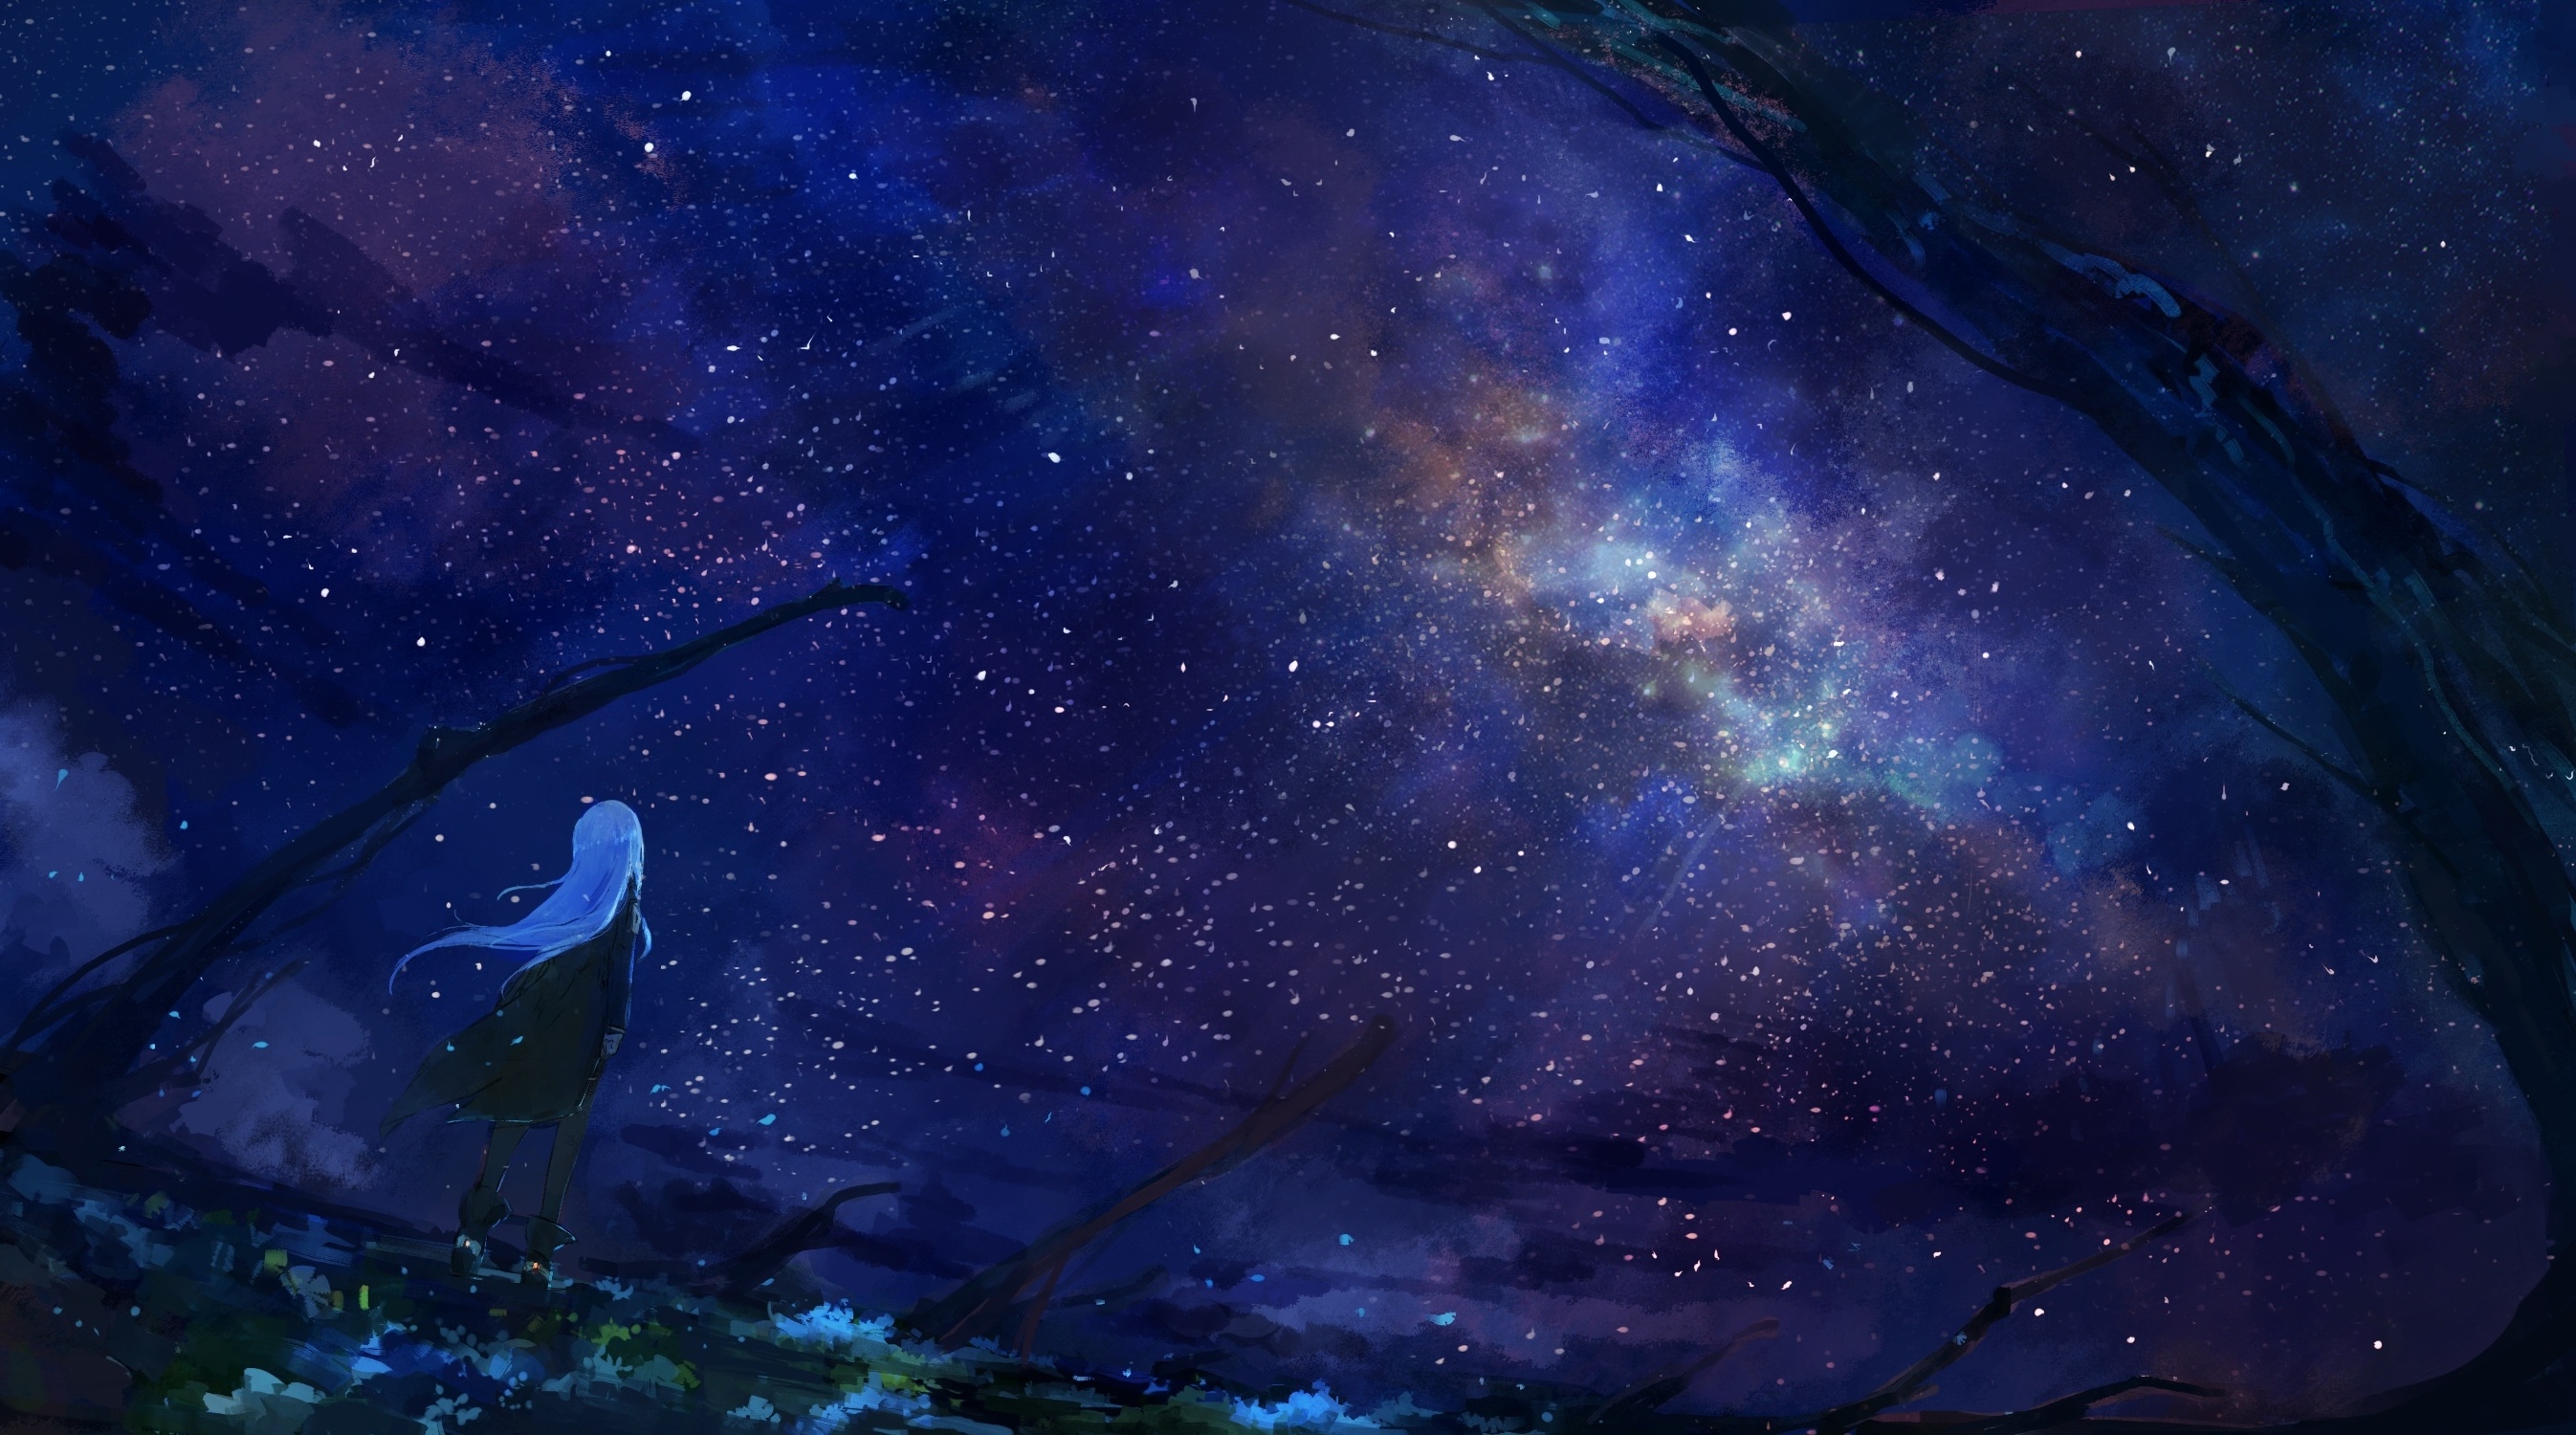 Wallpaper Anime Girl, Boots, Scenic, Night, Back View, Anime Starry Sky:2693x1500